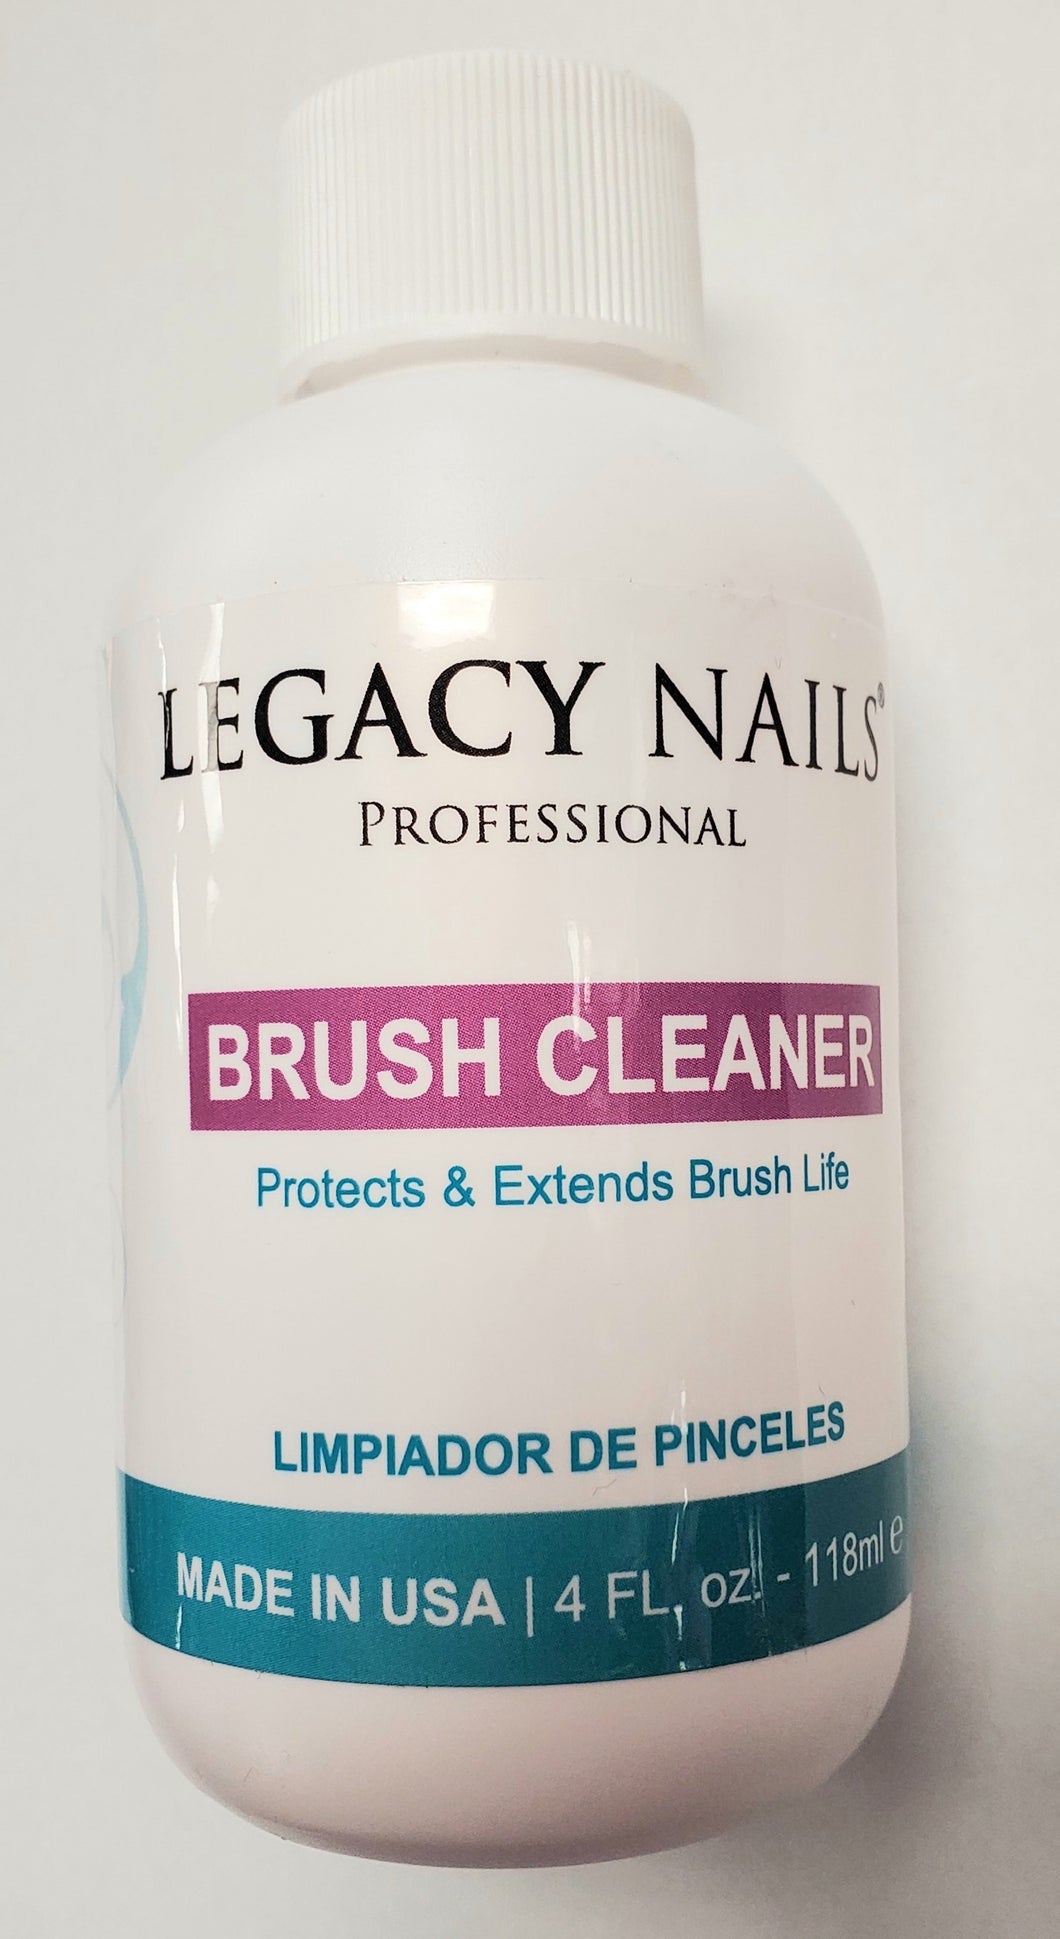 Legacy nails brush cleaner